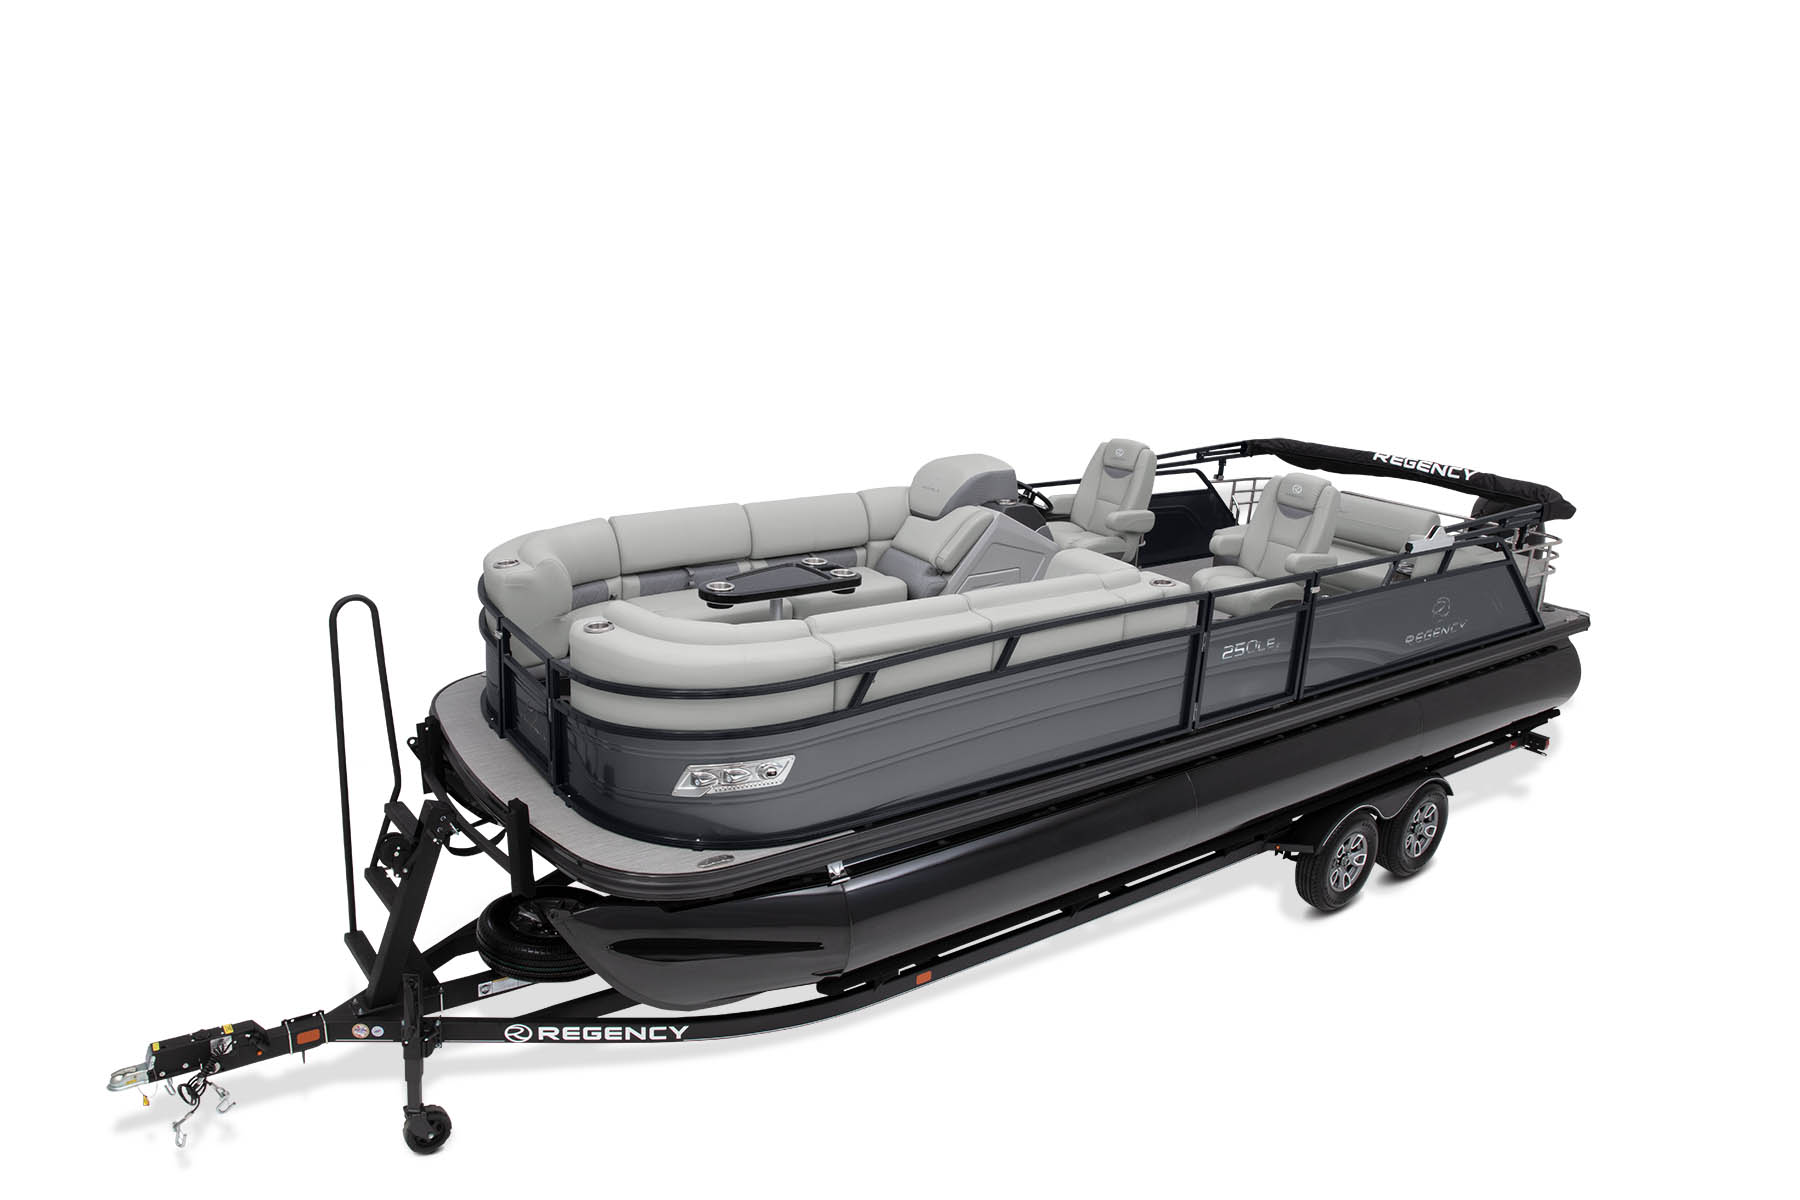 2023 REGENCY Luxury-Pontoon - 250 LE3 Sport for sale in the Pompano Beach, FL area. Get the best drive out price on 2023 REGENCY Luxury-Pontoon - 250 LE3 Sport and compare.